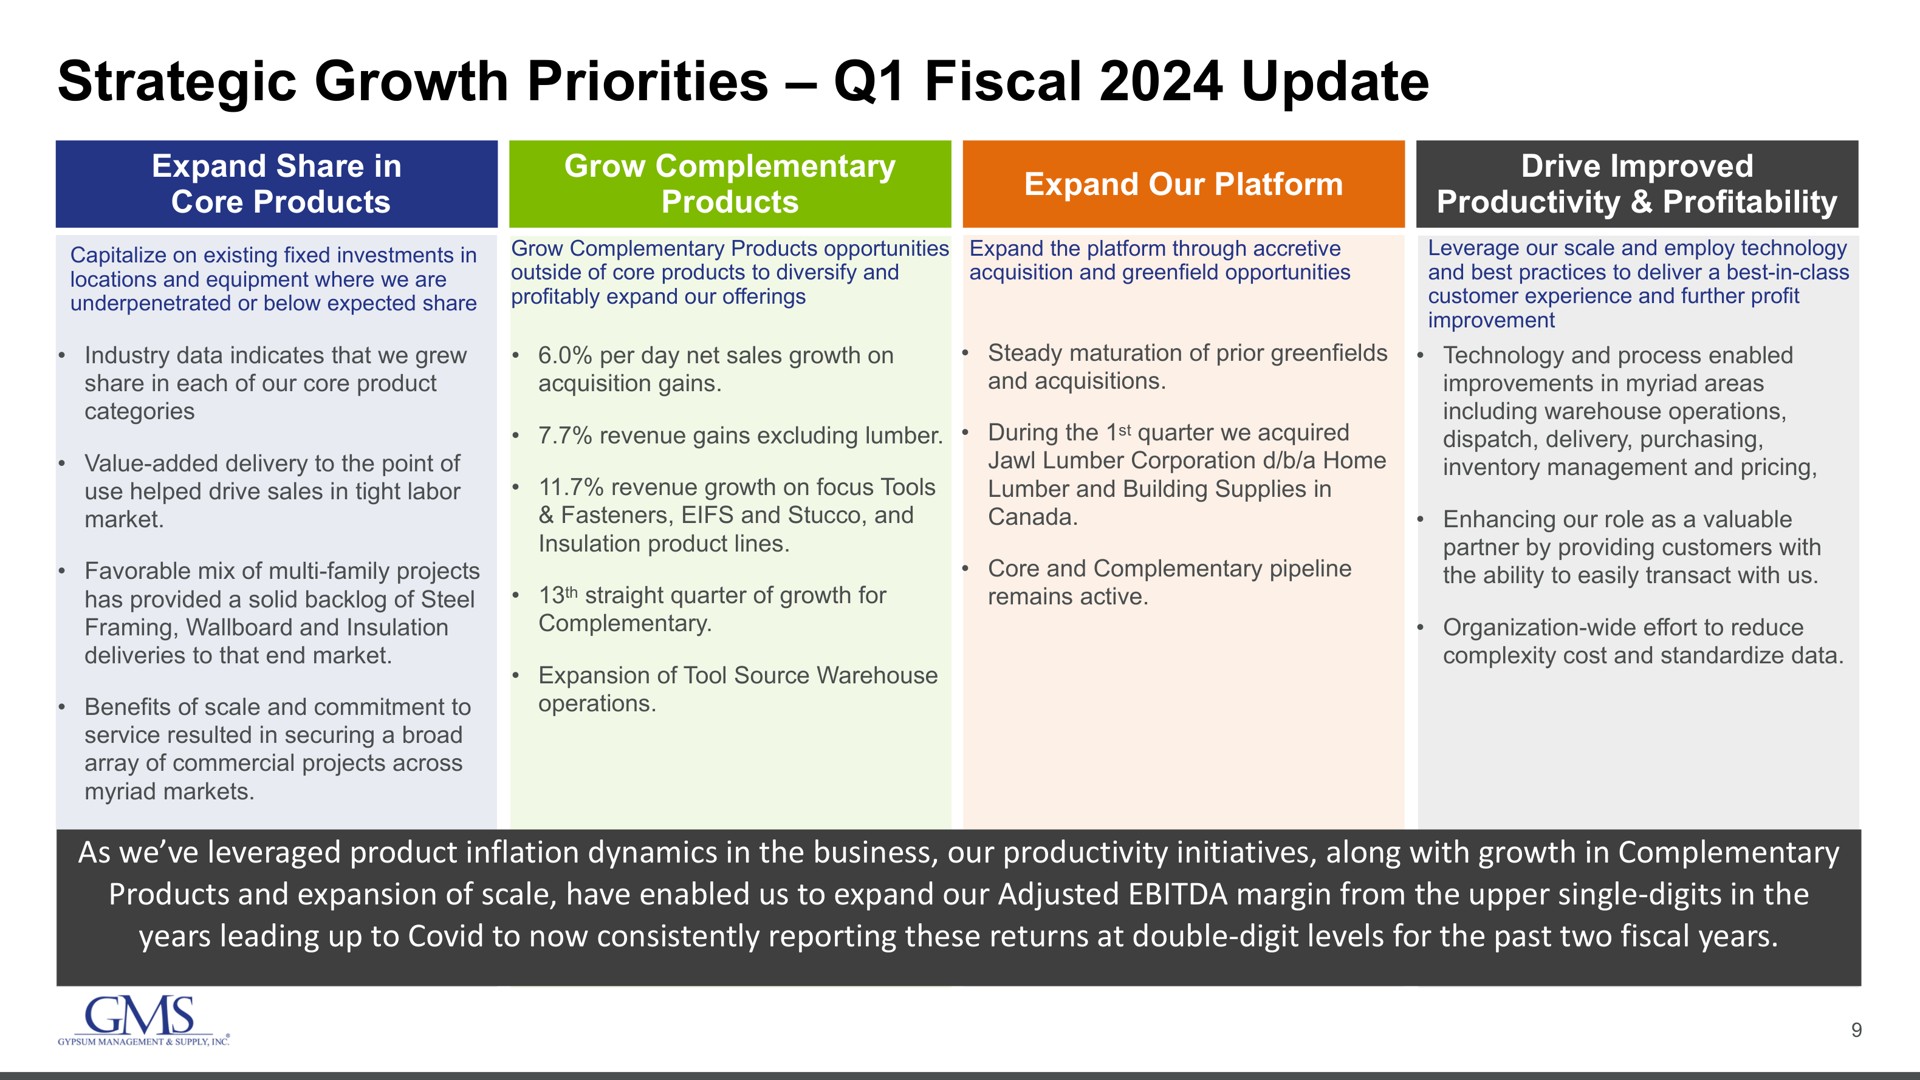 strategic growth priorities fiscal update | GMS